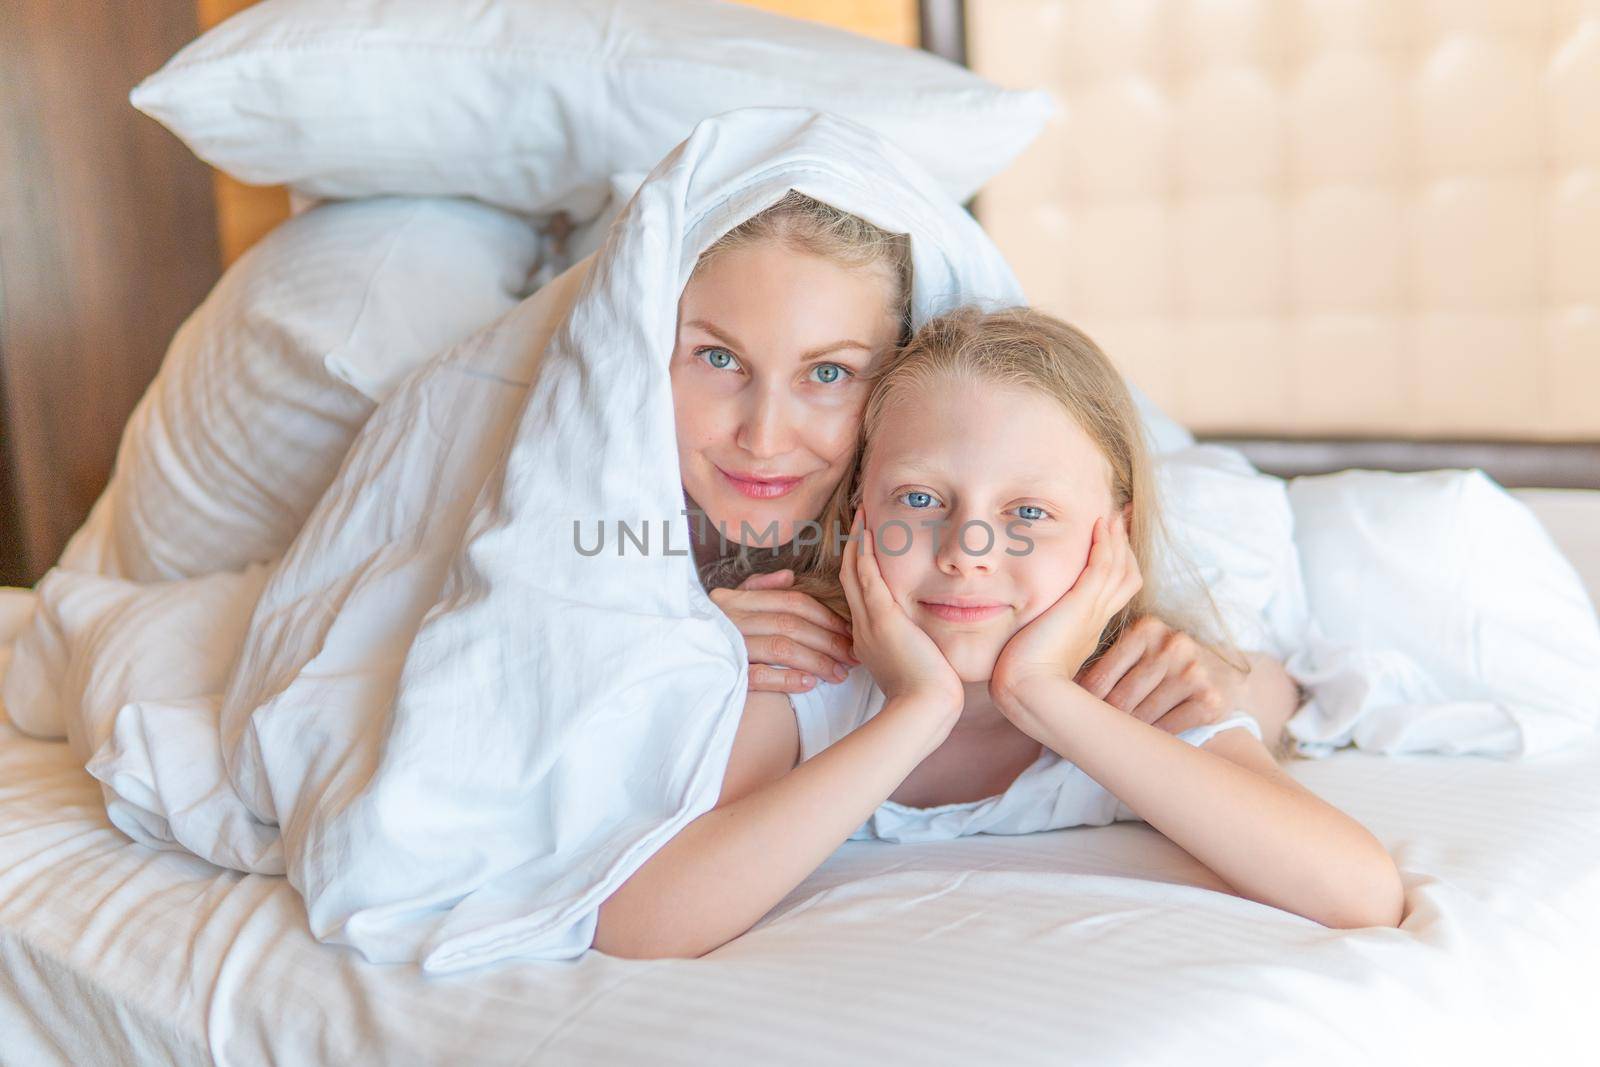 Blanket over family daughter glad woman bed head young eyes, concept view white in relax from health smile, attractive comfortable. Healthy relaxation serene,